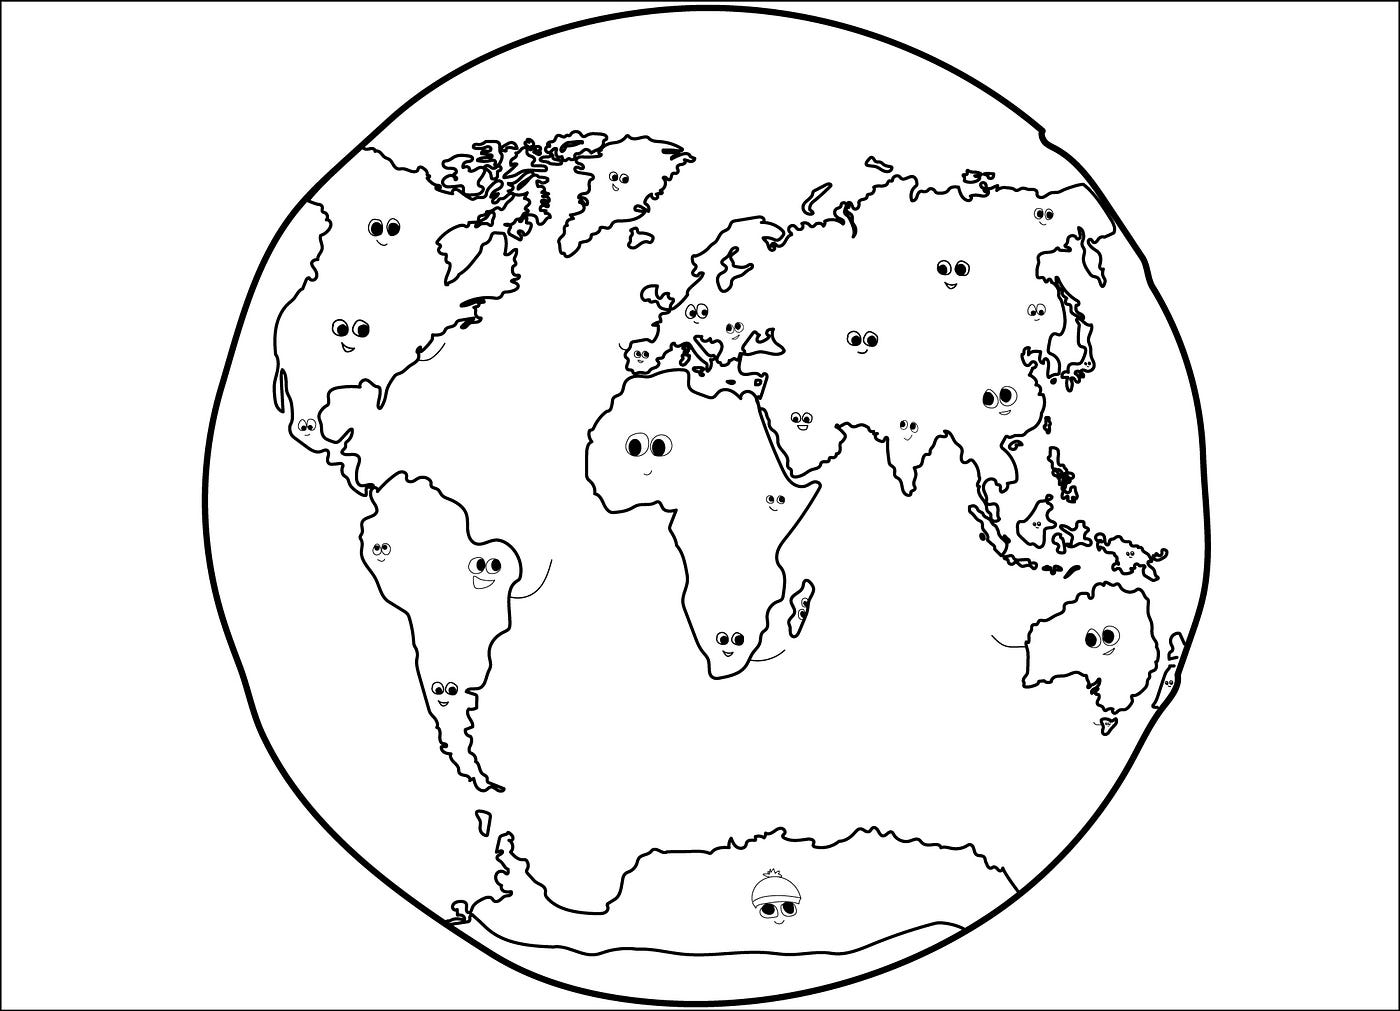 Illustration of the world with faces on several continents.